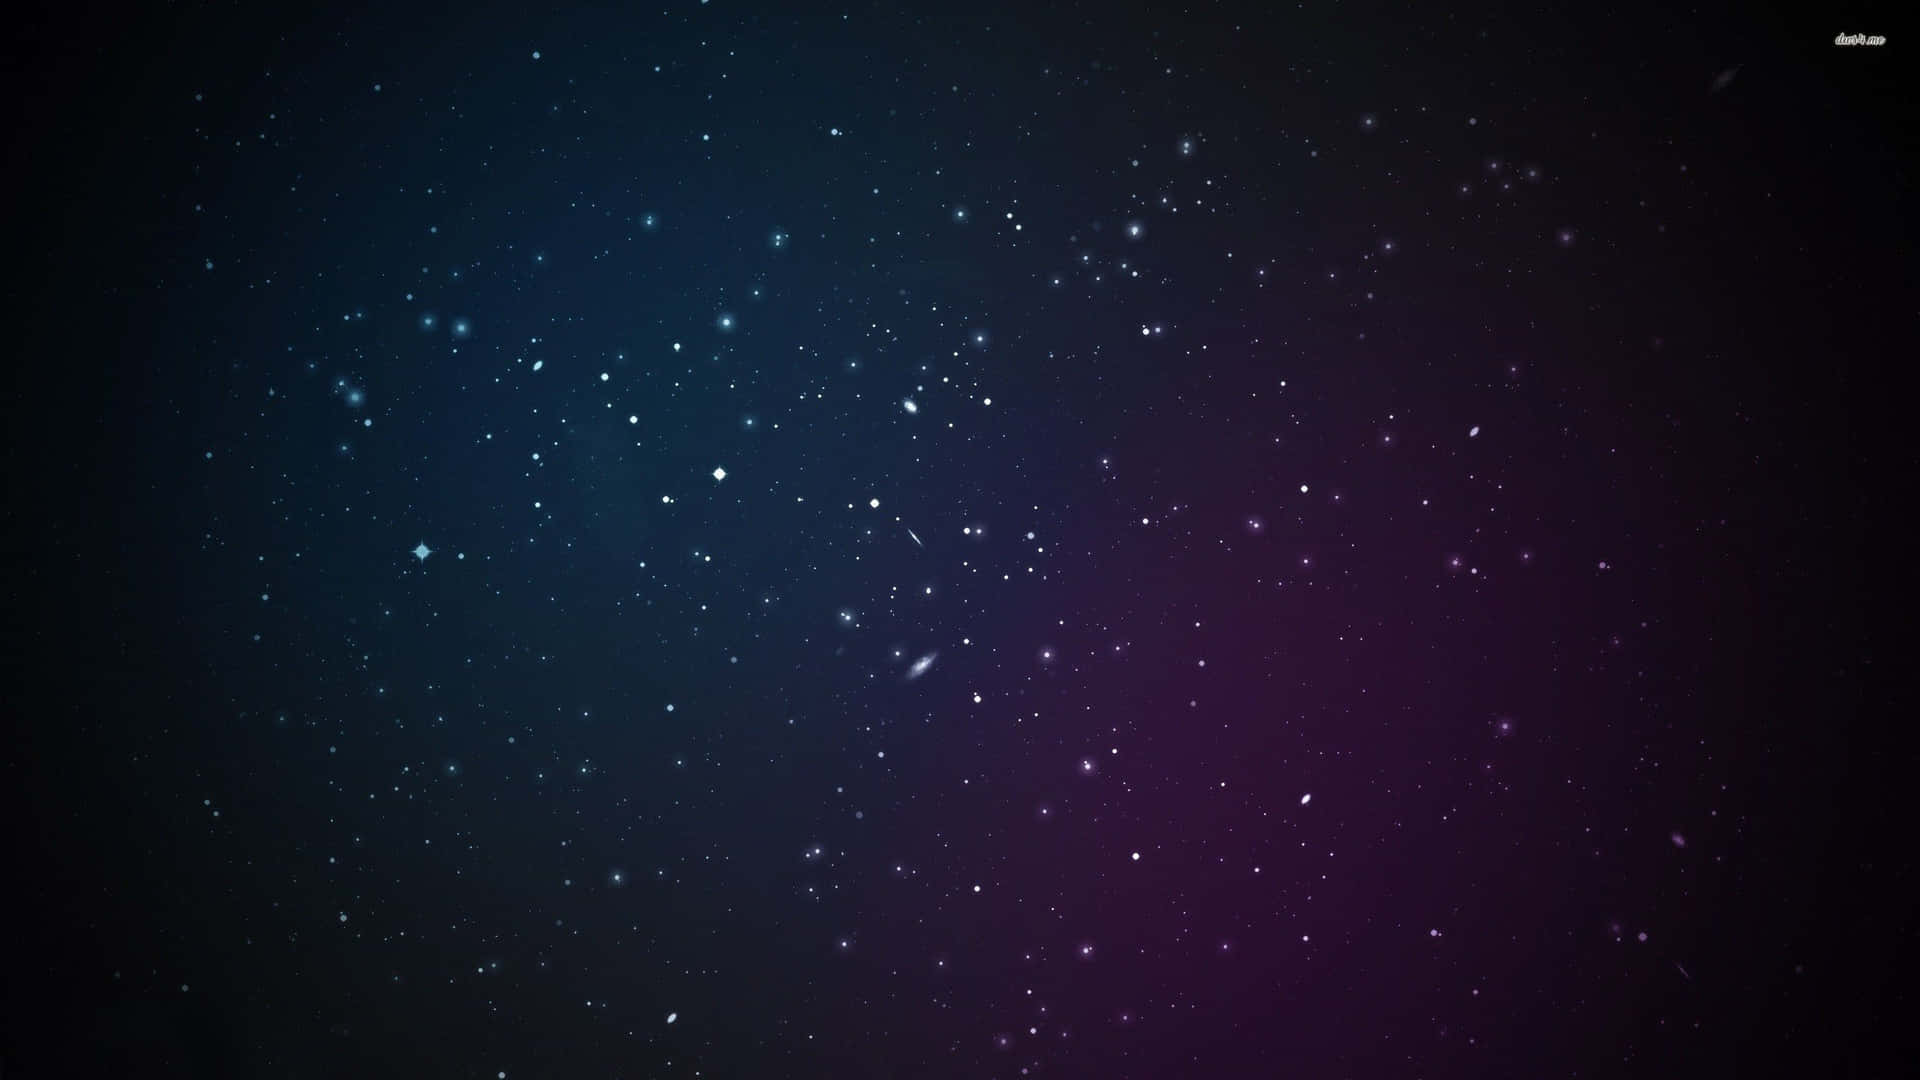 hipster blue galaxy background